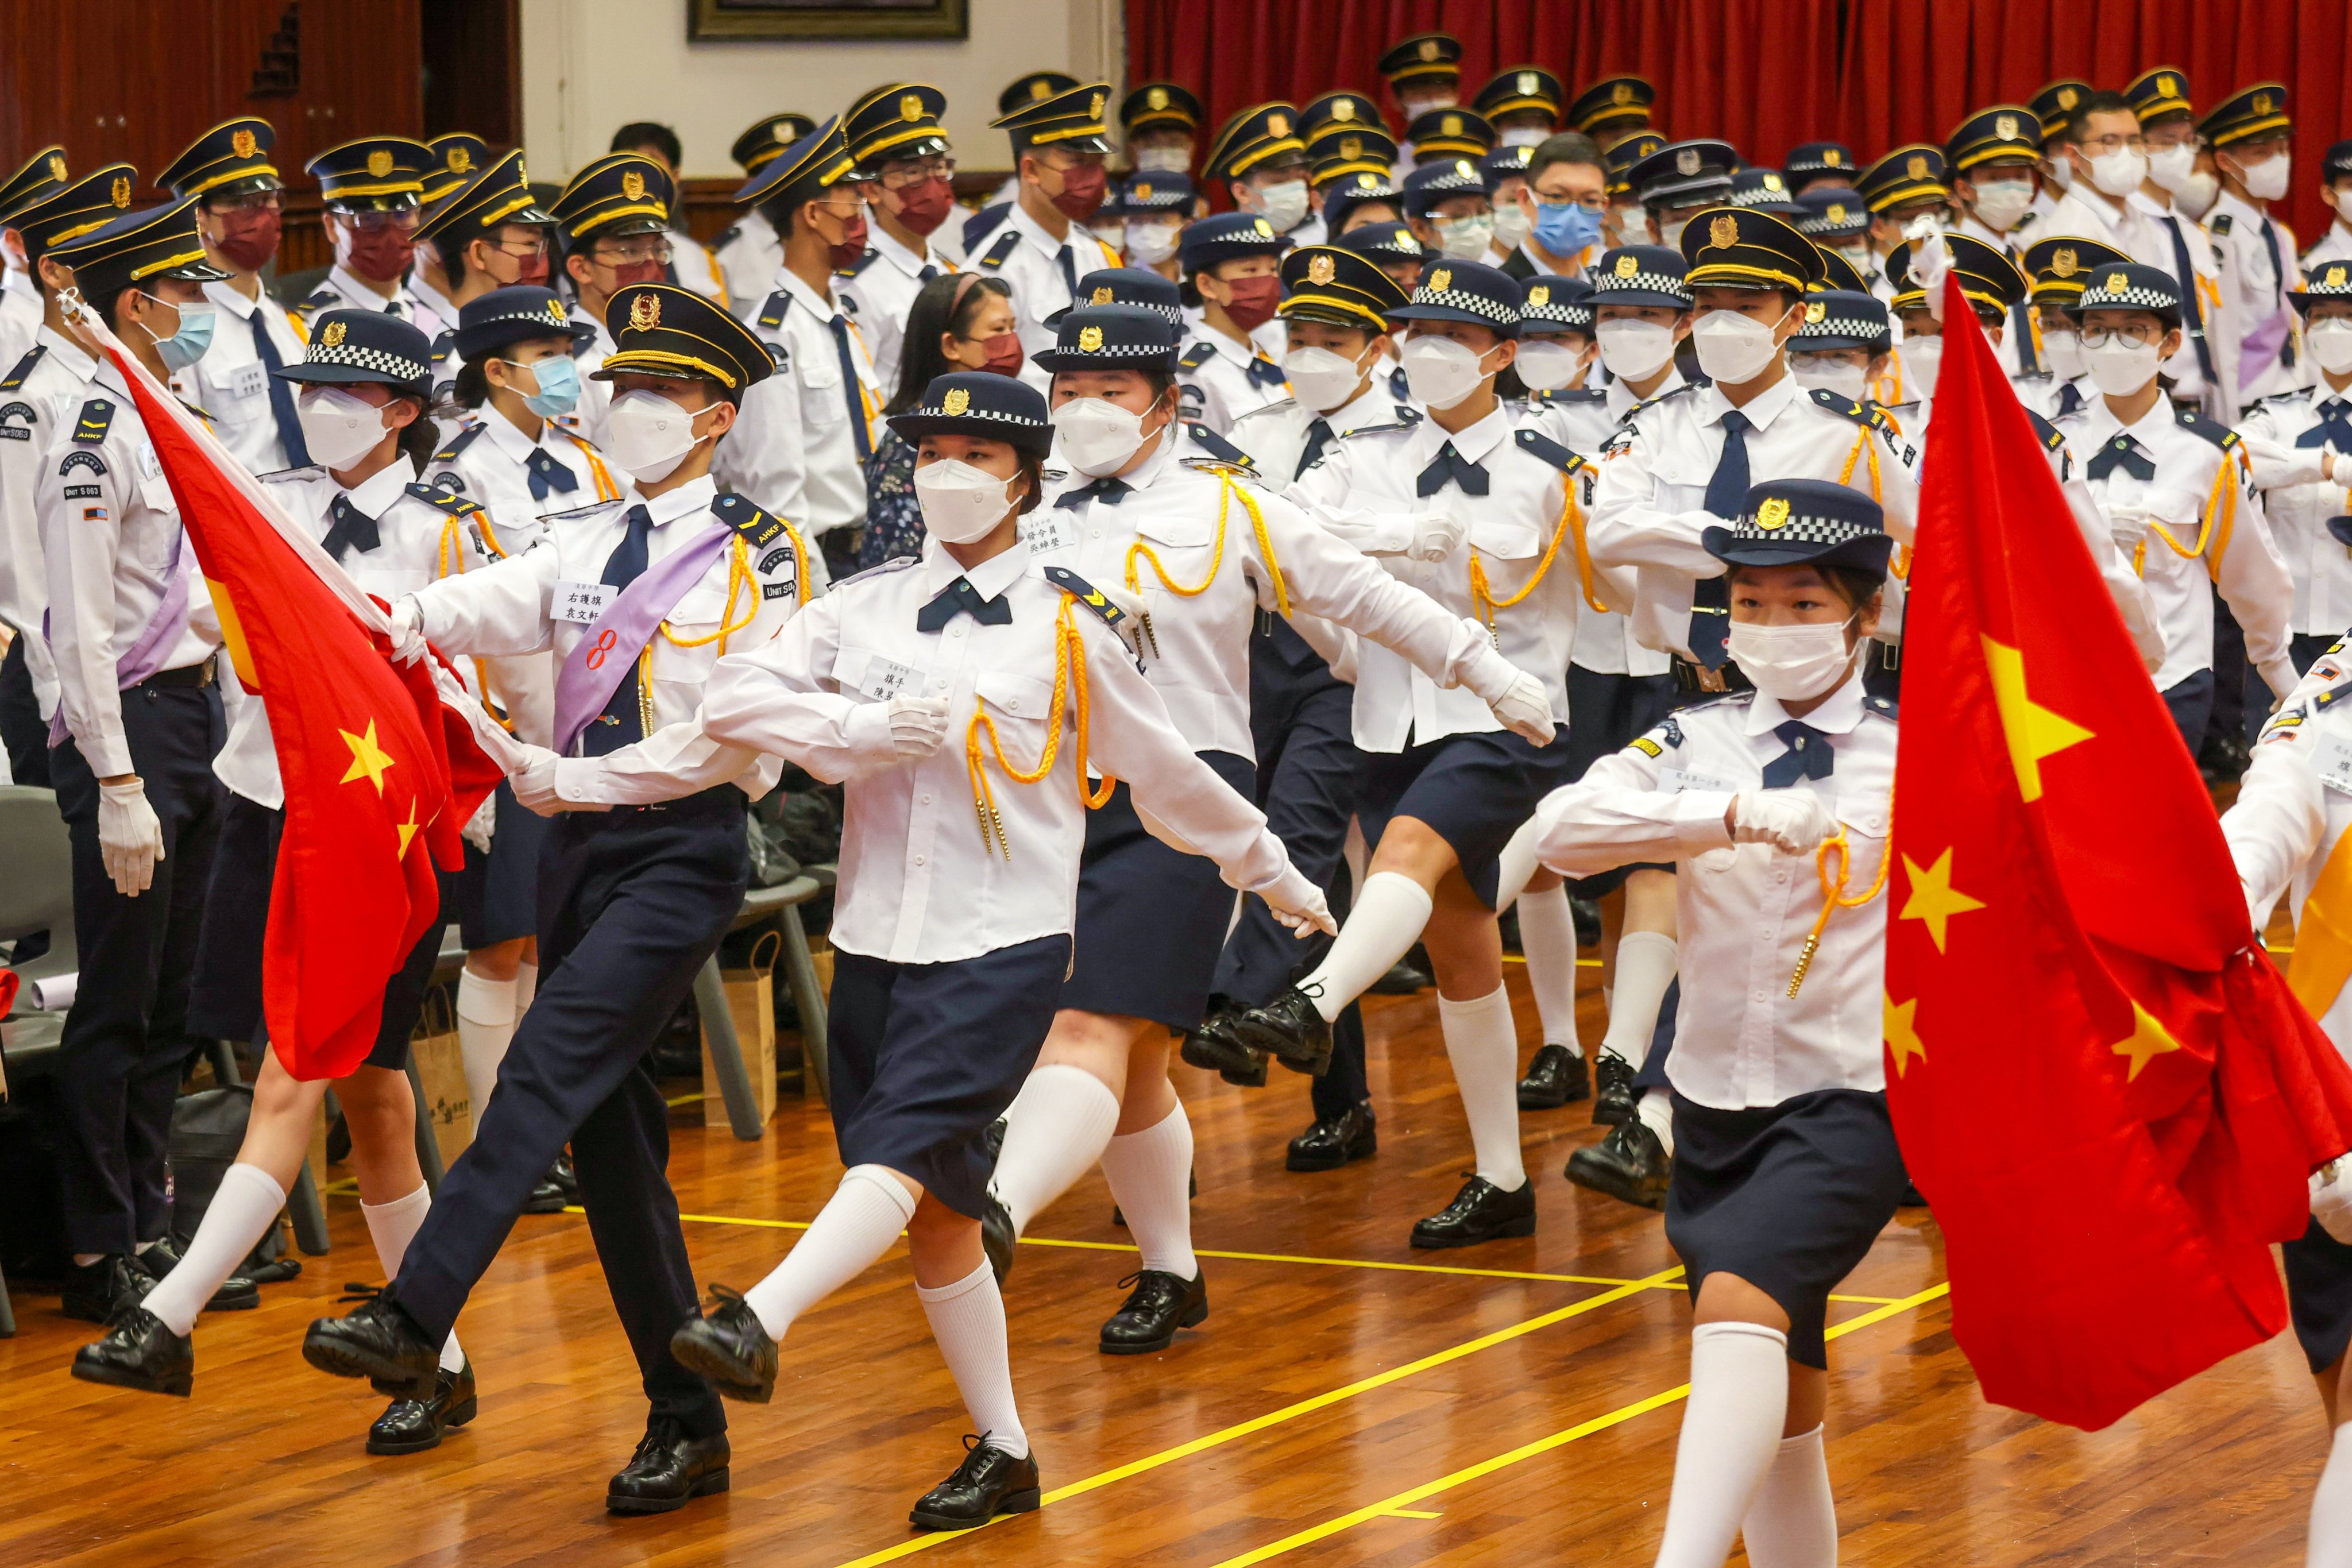 Schools can teach about national history and achievements to students through films, cultural events and visits to mainland China, Chief Secretary Eric Chan has said. Photo: Jonathan Wong